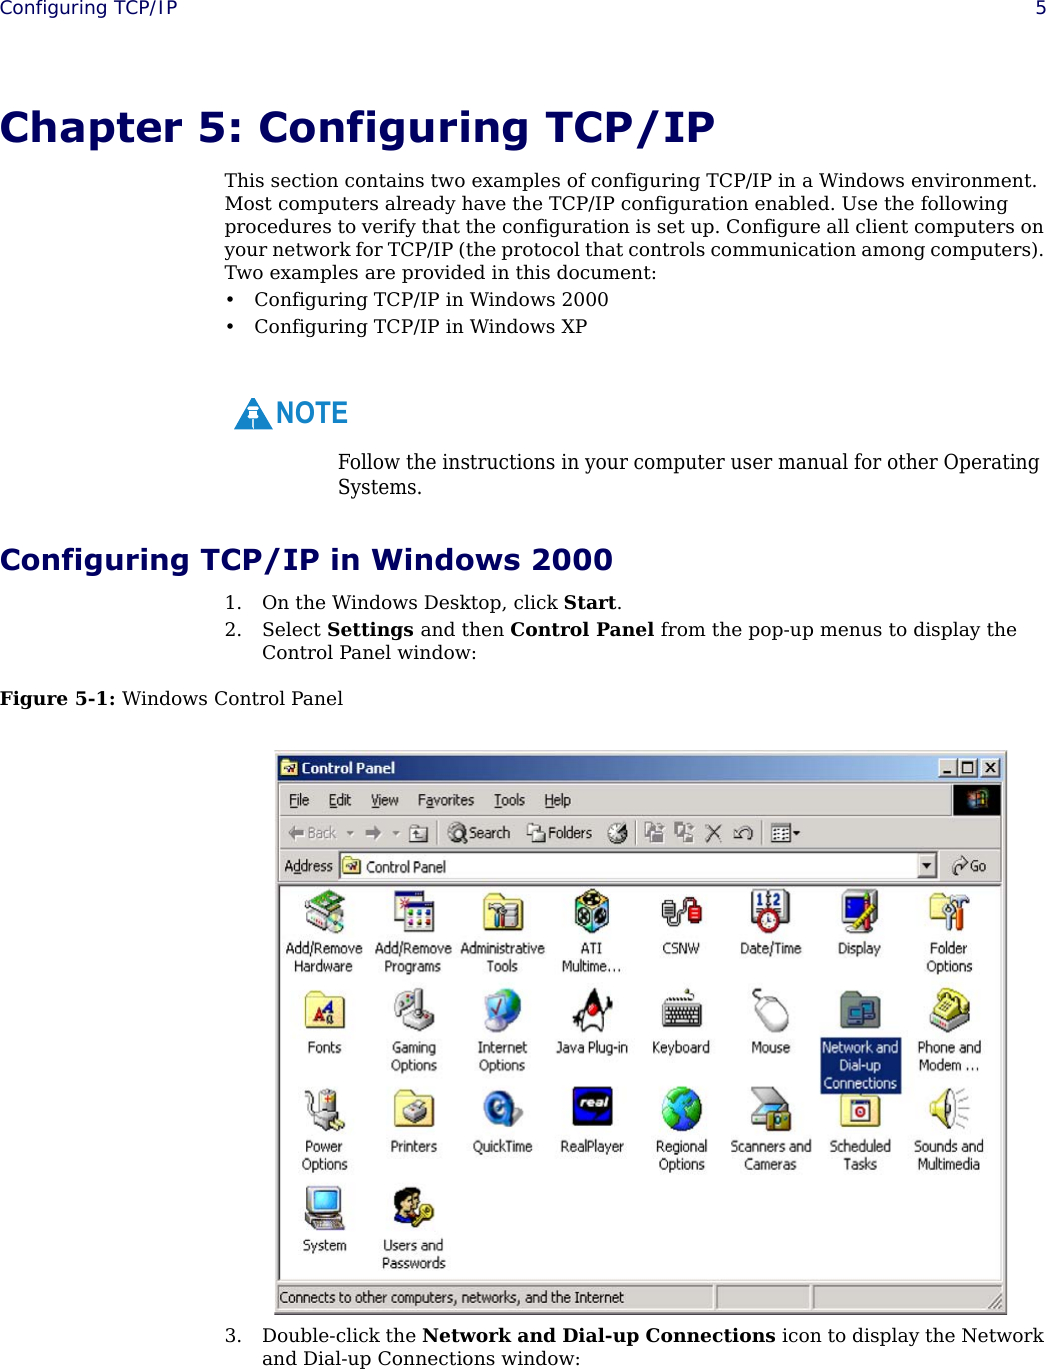  Configuring TCP/IP 5Chapter 5: Configuring TCP/IPThis section contains two examples of configuring TCP/IP in a Windows environment. Most computers already have the TCP/IP configuration enabled. Use the following procedures to verify that the configuration is set up. Configure all client computers on your network for TCP/IP (the protocol that controls communication among computers). Two examples are provided in this document:• Configuring TCP/IP in Windows 2000• Configuring TCP/IP in Windows XP Configuring TCP/IP in Windows 20001. On the Windows Desktop, click Start.2. Select Settings and then Control Panel from the pop-up menus to display the Control Panel window:Figure 5-1: Windows Control Panel3. Double-click the Network and Dial-up Connections icon to display the Network and Dial-up Connections window:Follow the instructions in your computer user manual for other Operating Systems.NOTE